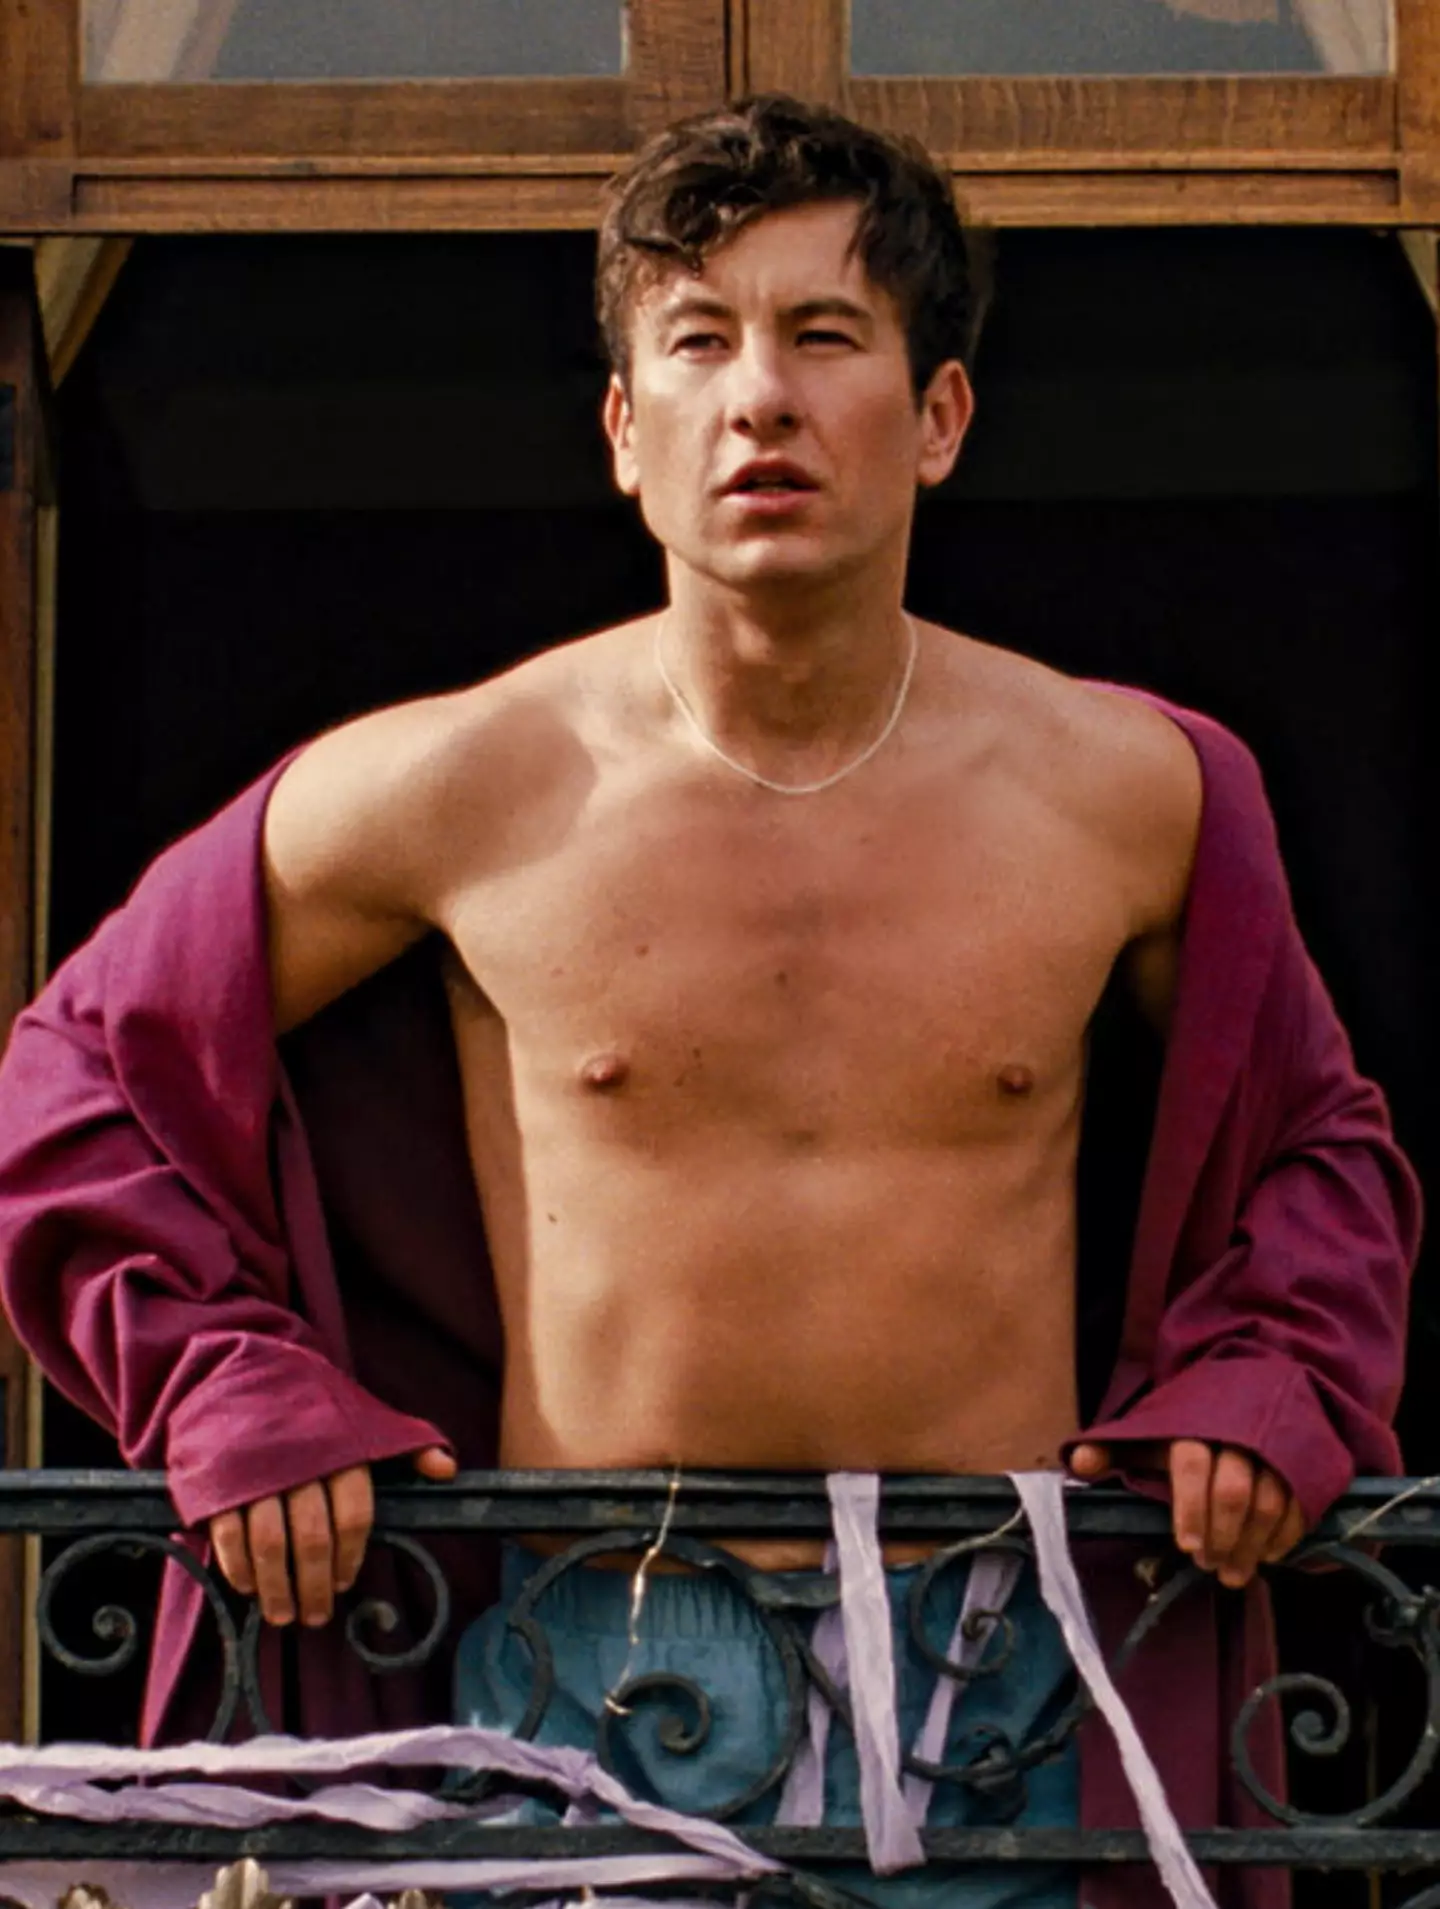 Barry Keoghan stars in the divisive black comedy 'Saltburn,' which has become notorious for its graphic R-rated scenes.